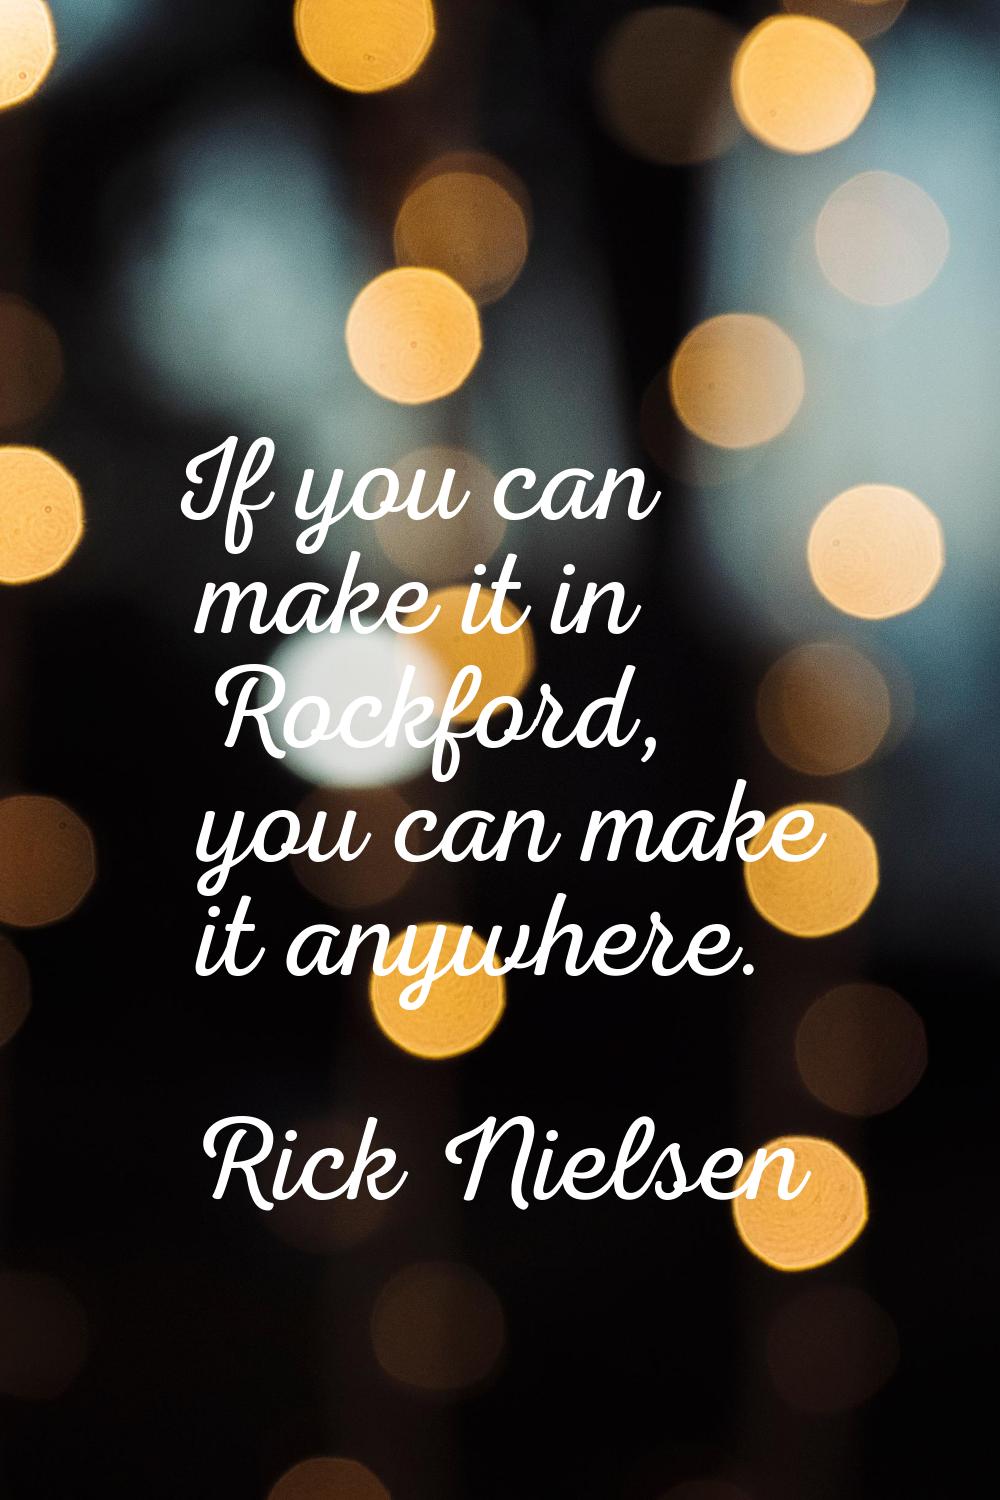 If you can make it in Rockford, you can make it anywhere.